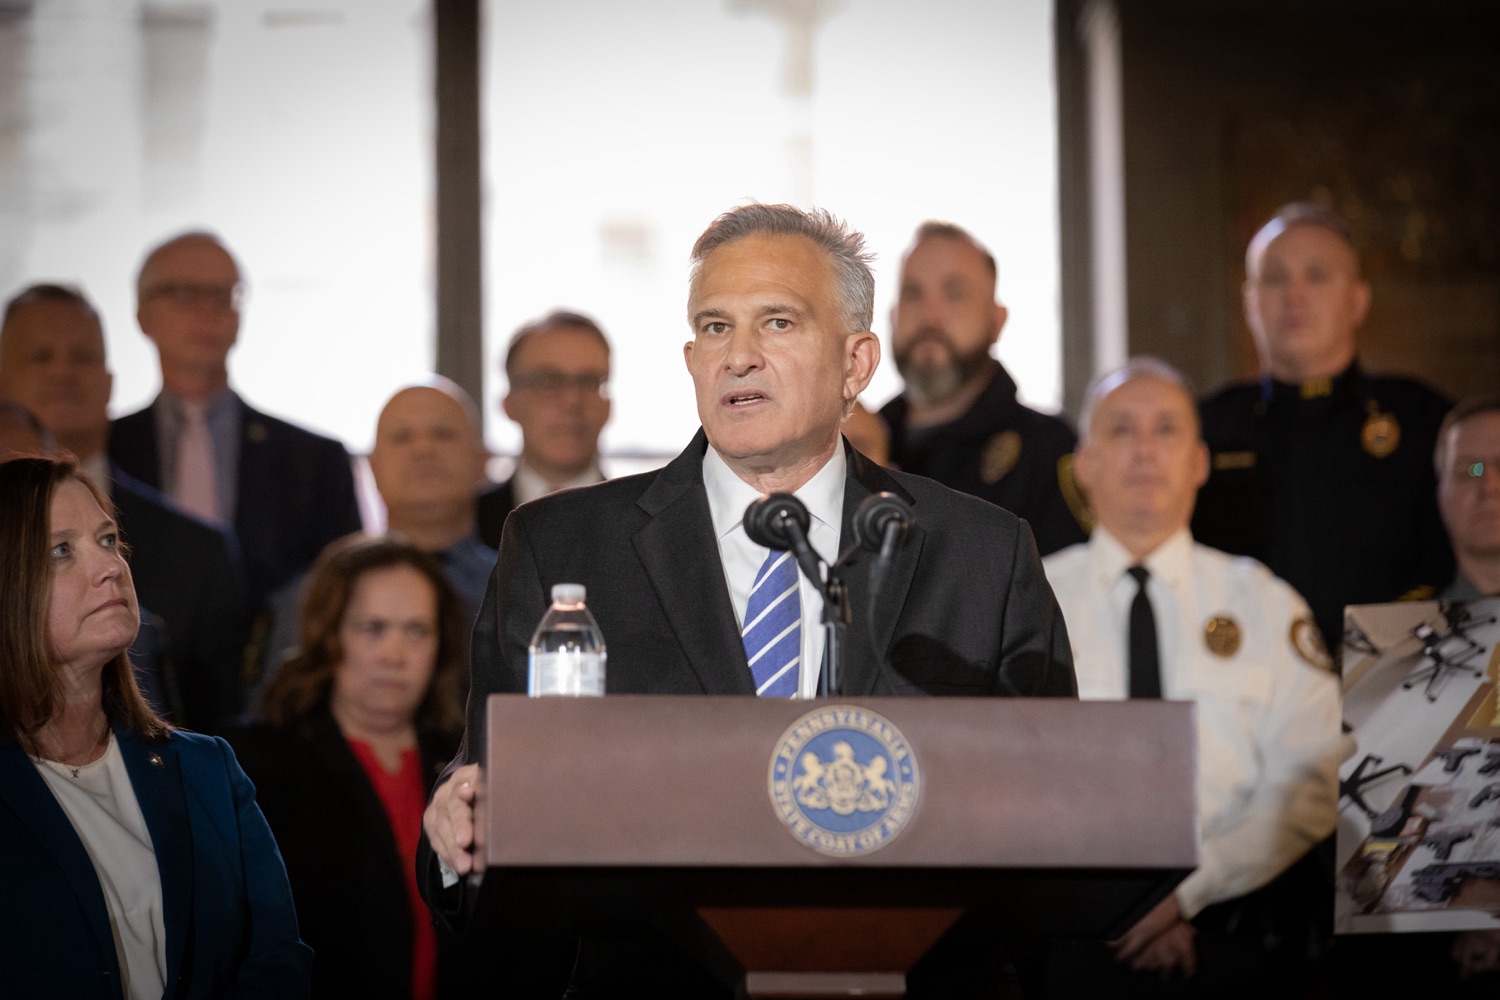 Pennsylvania Attorney General Michelle Henry and Allegheny County District Attorney Stephen Zappala were joined by law enforcement and community collaborators to announce a new public safety initiative in Allegheny County. Pictured here is Stephen Zappala, Allegheny County District Attorney, delivering remarks during the event. Pittsburgh, Pennsylvania.<br><a href="https://filesource.amperwave.net/commonwealthofpa/photo/24297_oag_publicSafety_JAP_08.jpg" target="_blank">⇣ Download Photo</a>